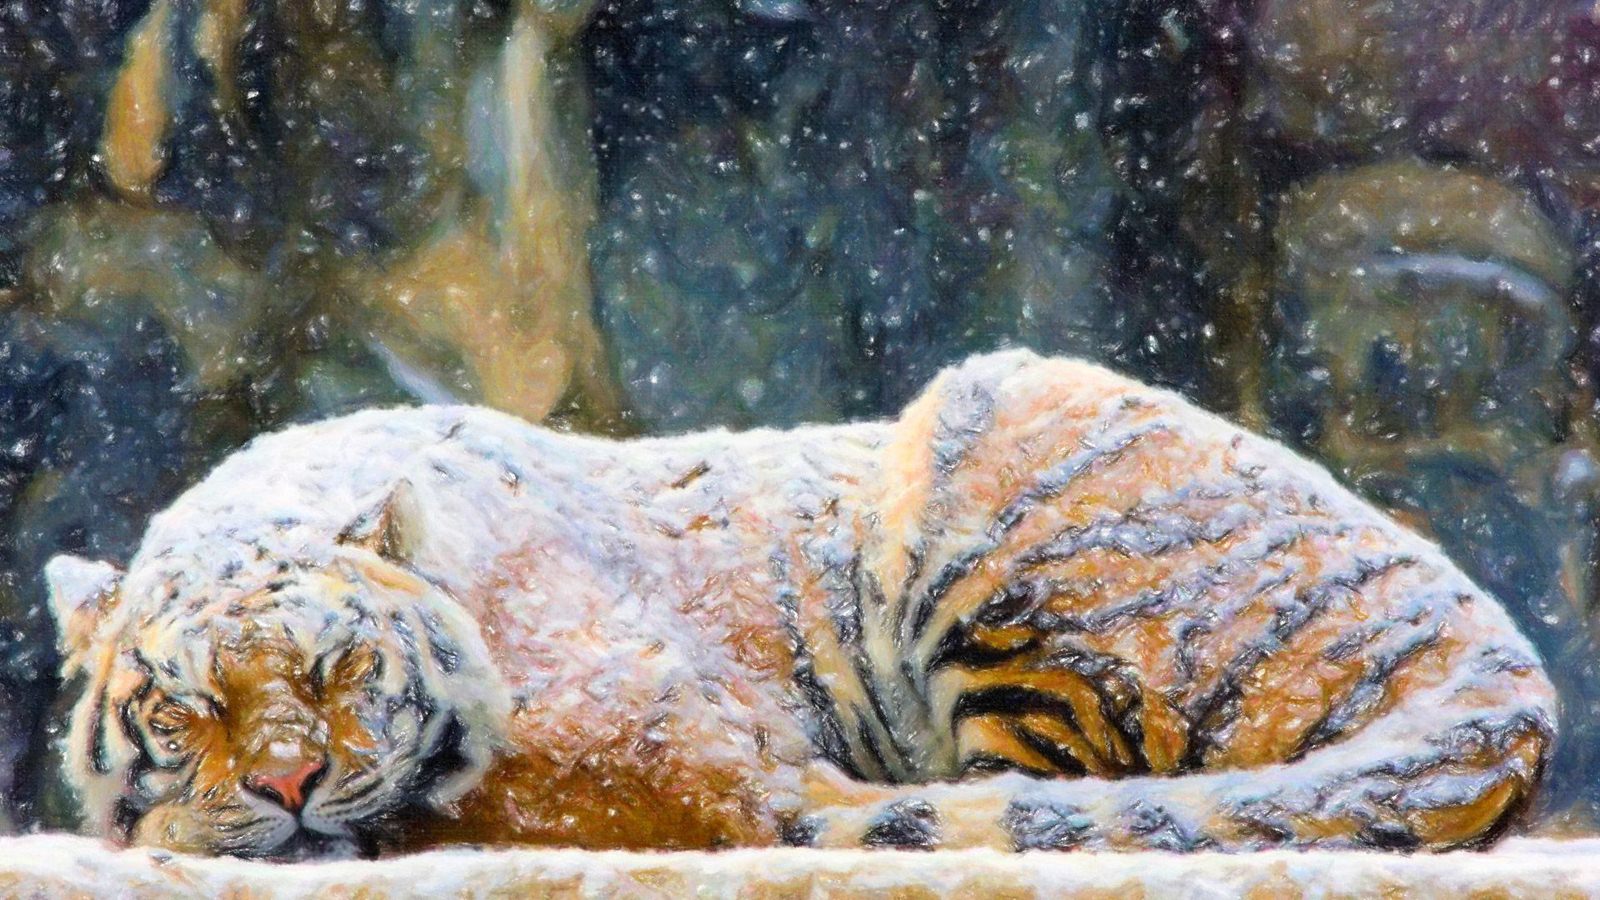 Snow Tiger HD Wallpaper Image Pictures